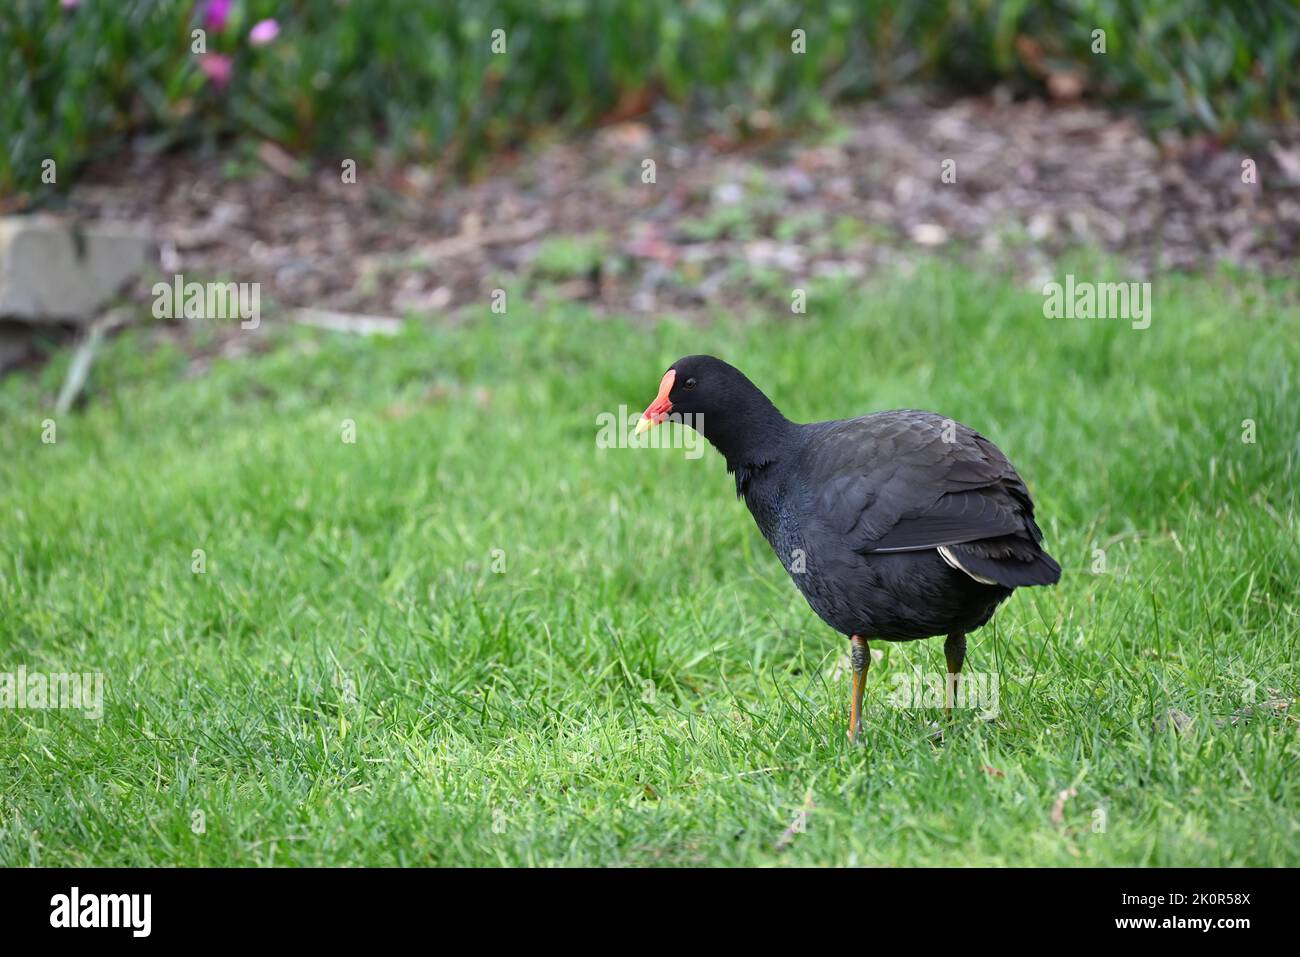 Dusky moorhen (gallinula tenebrosa) standing in a grassy area, near a garden bed, with its head turned to the left Stock Photo